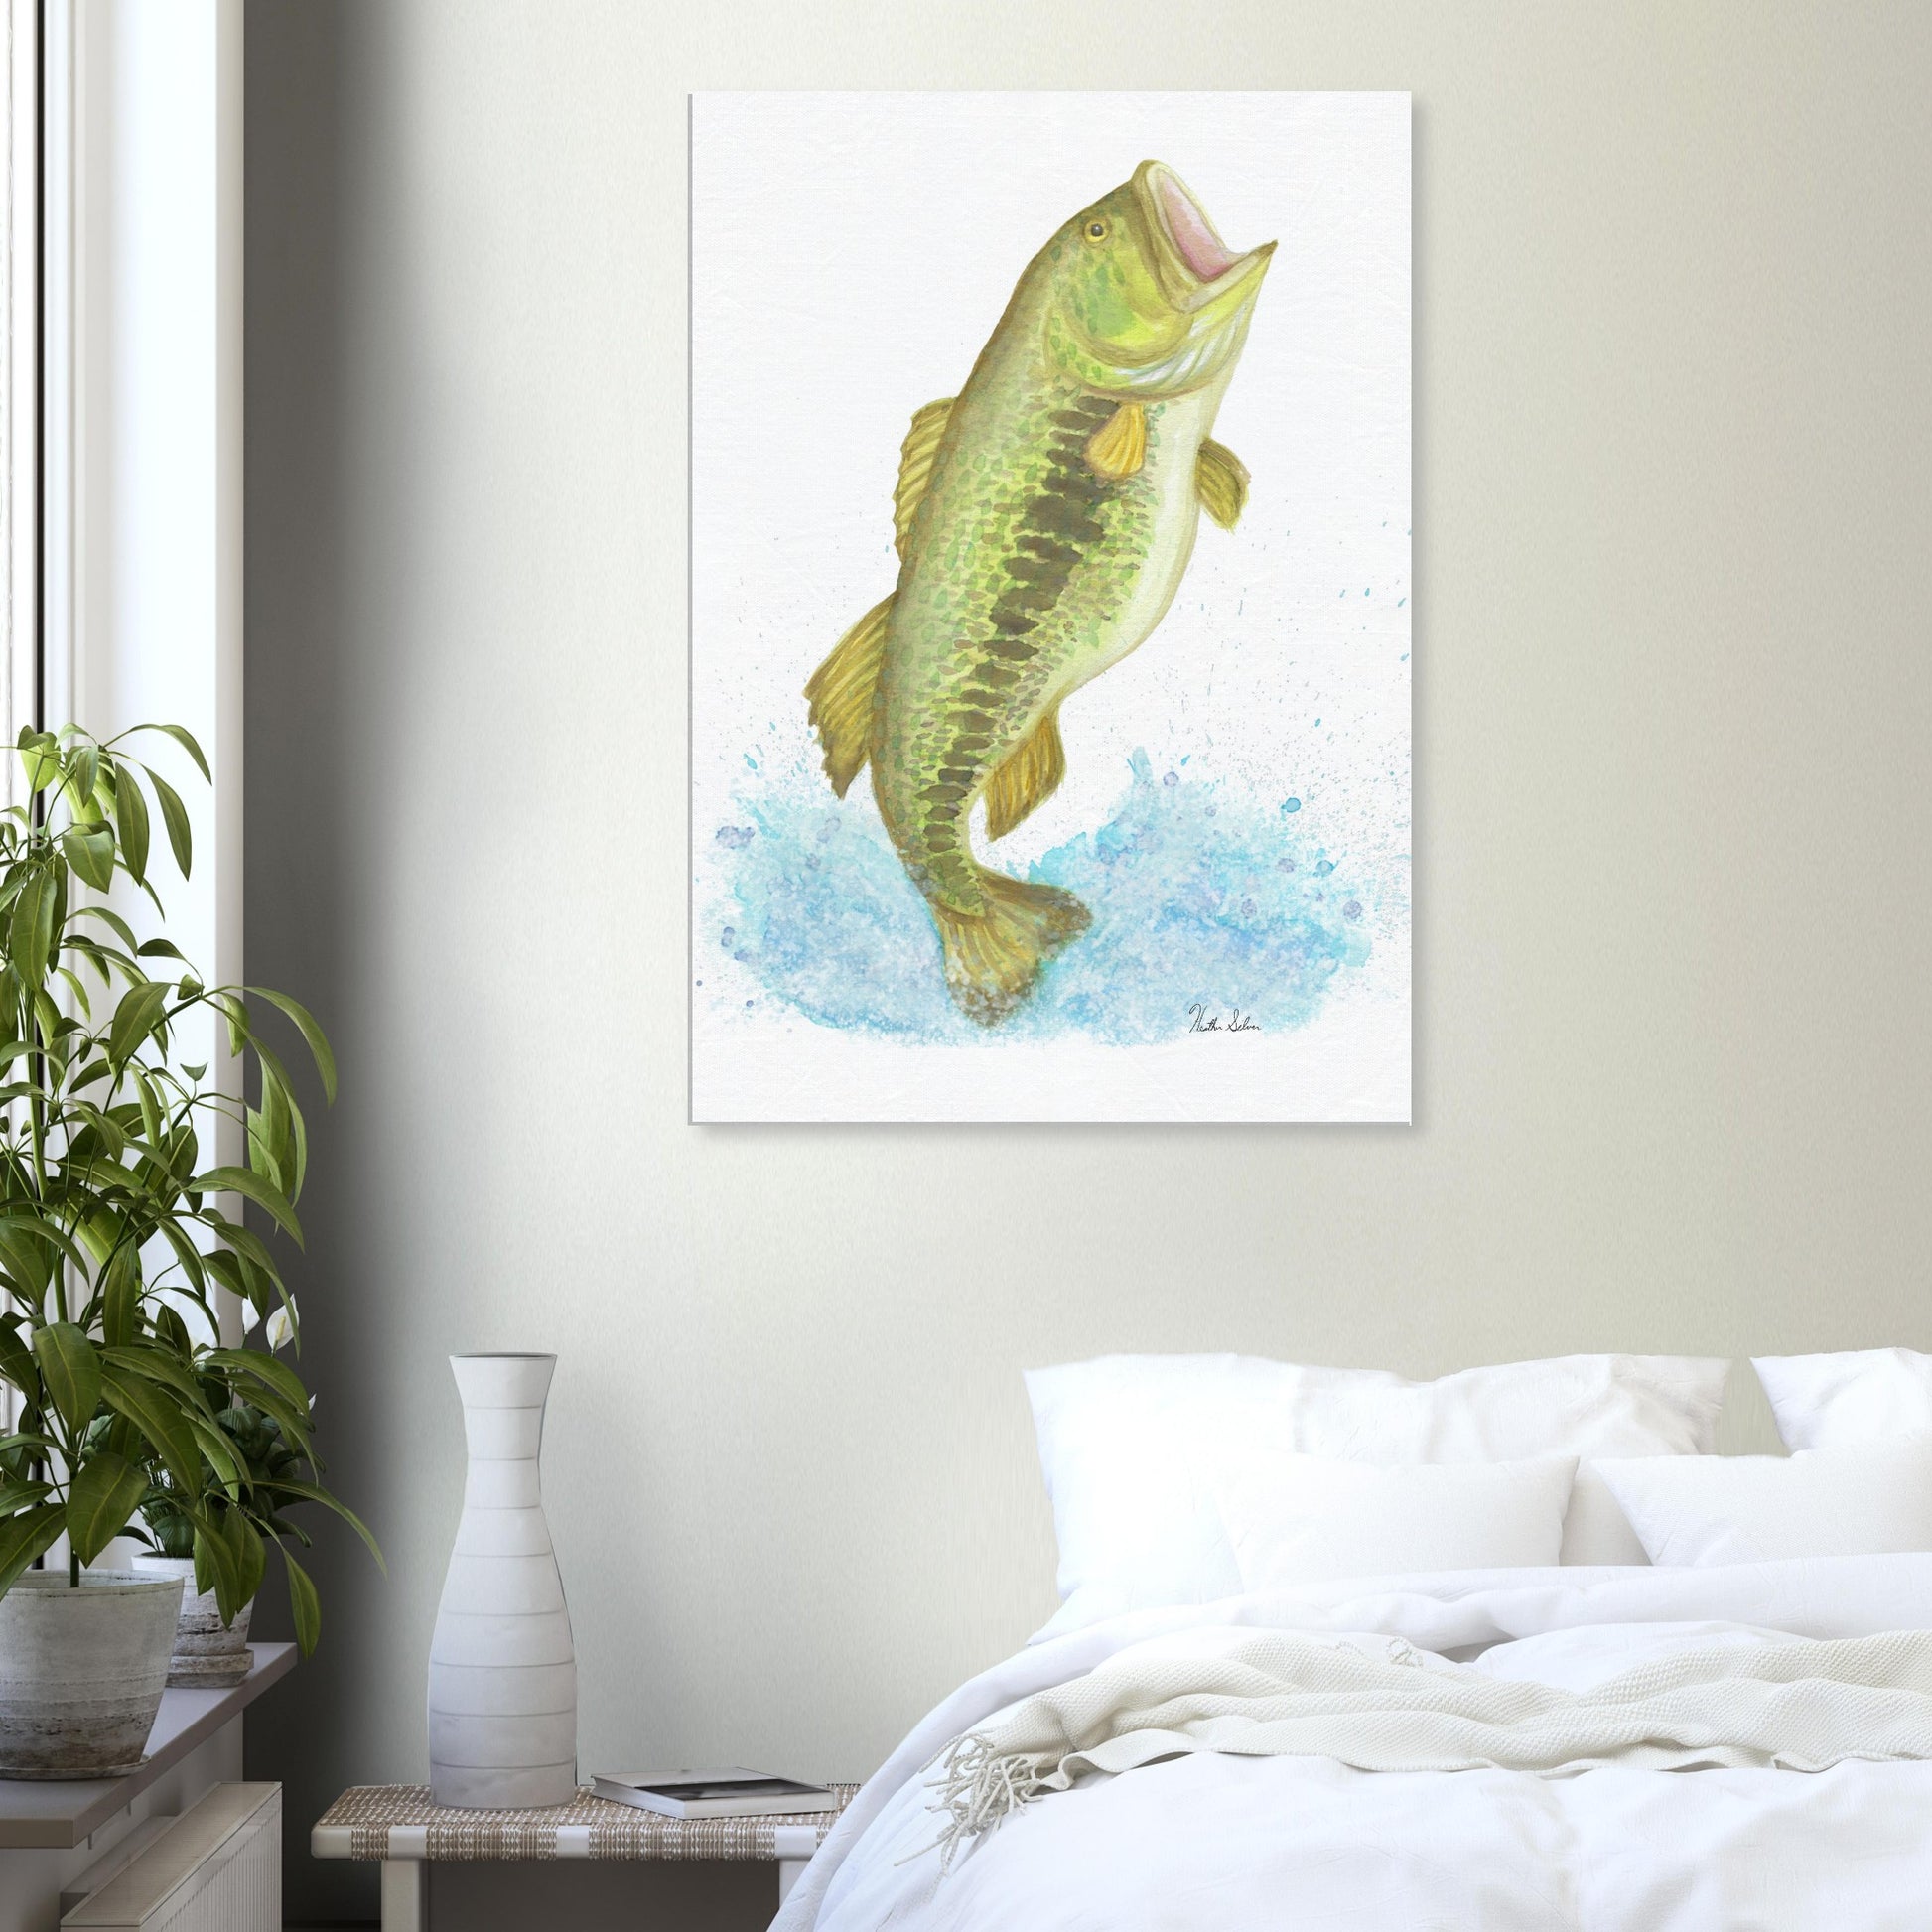 28 by 40 inch slim canvas wall art print featuring a watercolor painting of a largemouth bass leaping from the water. Shown on wall above white bed, nightstand, and potted plant.